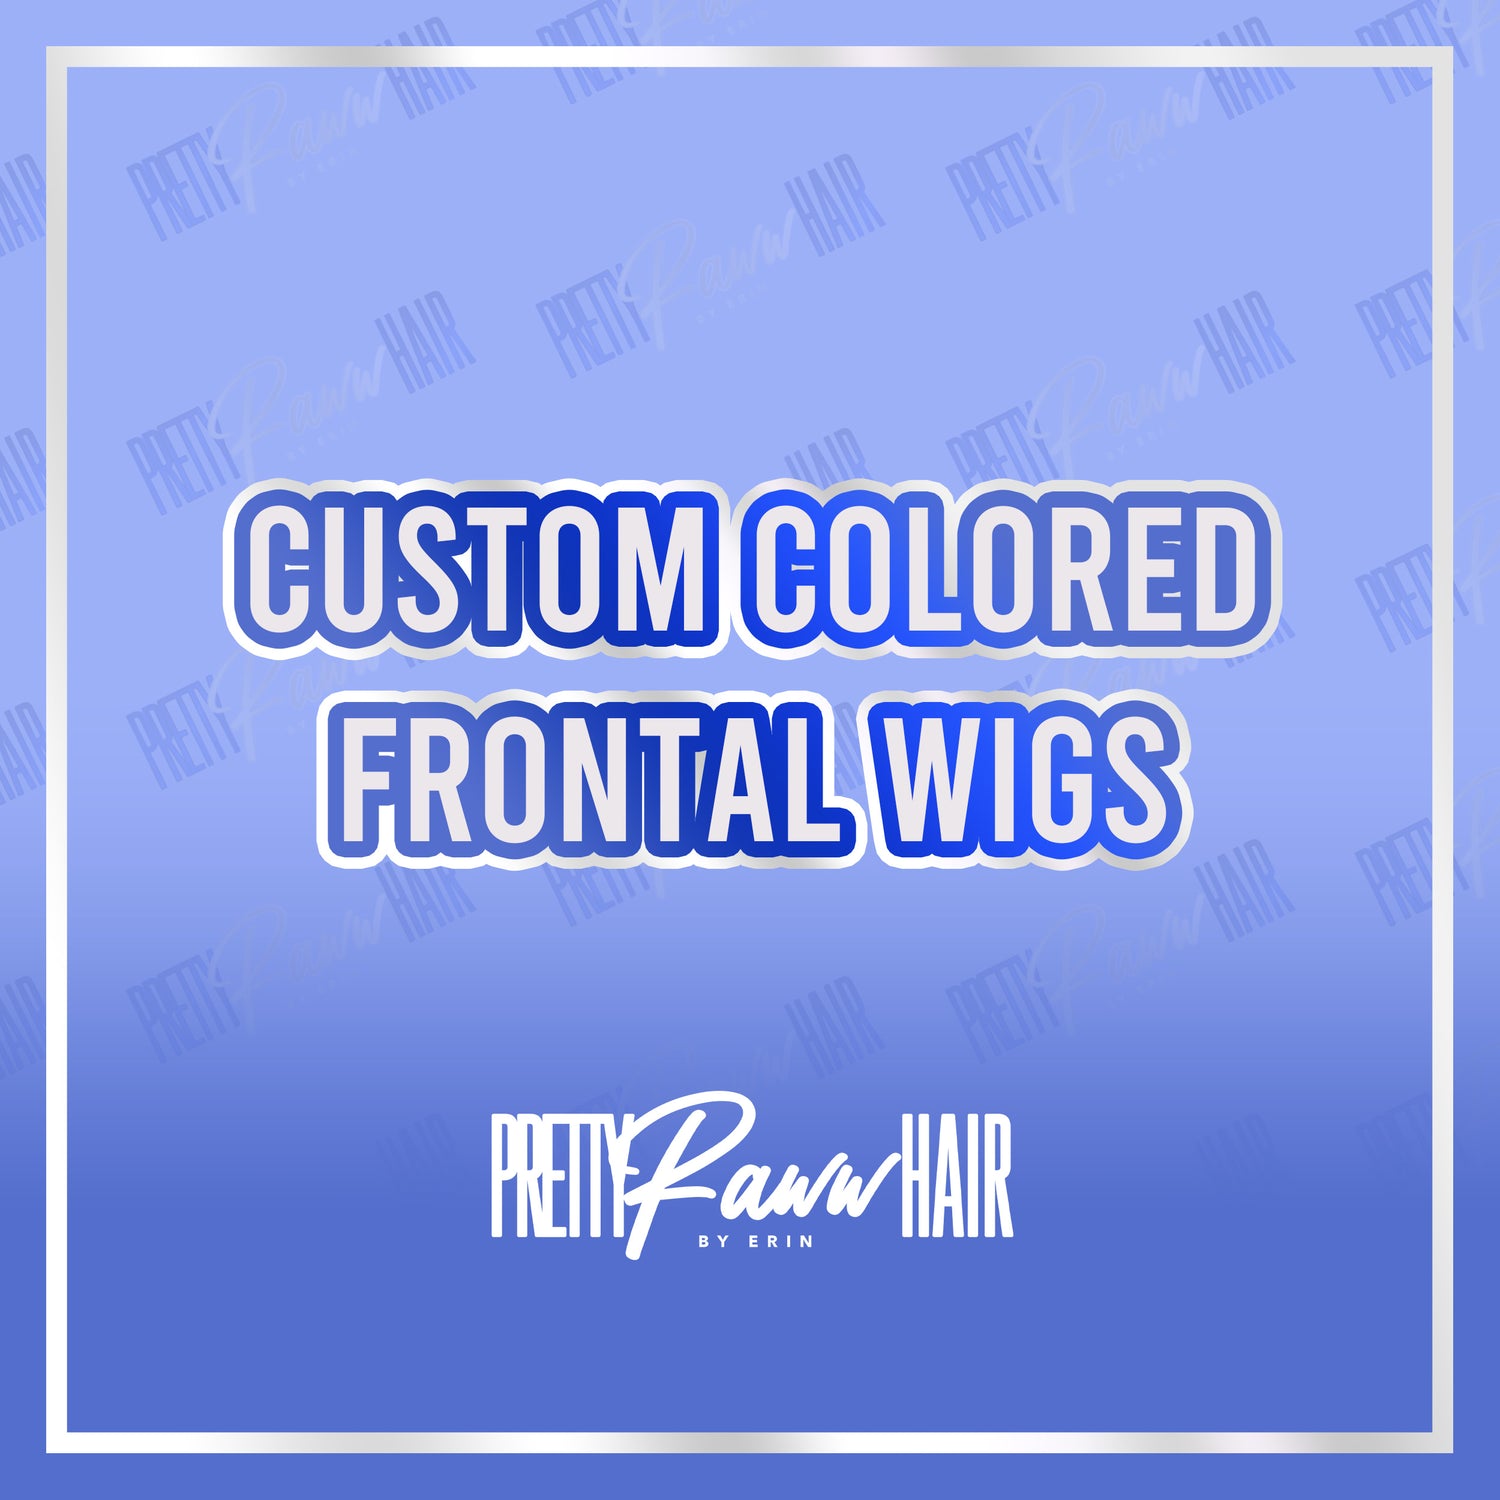 CUSTOM COLORED FRONTAL WIGS